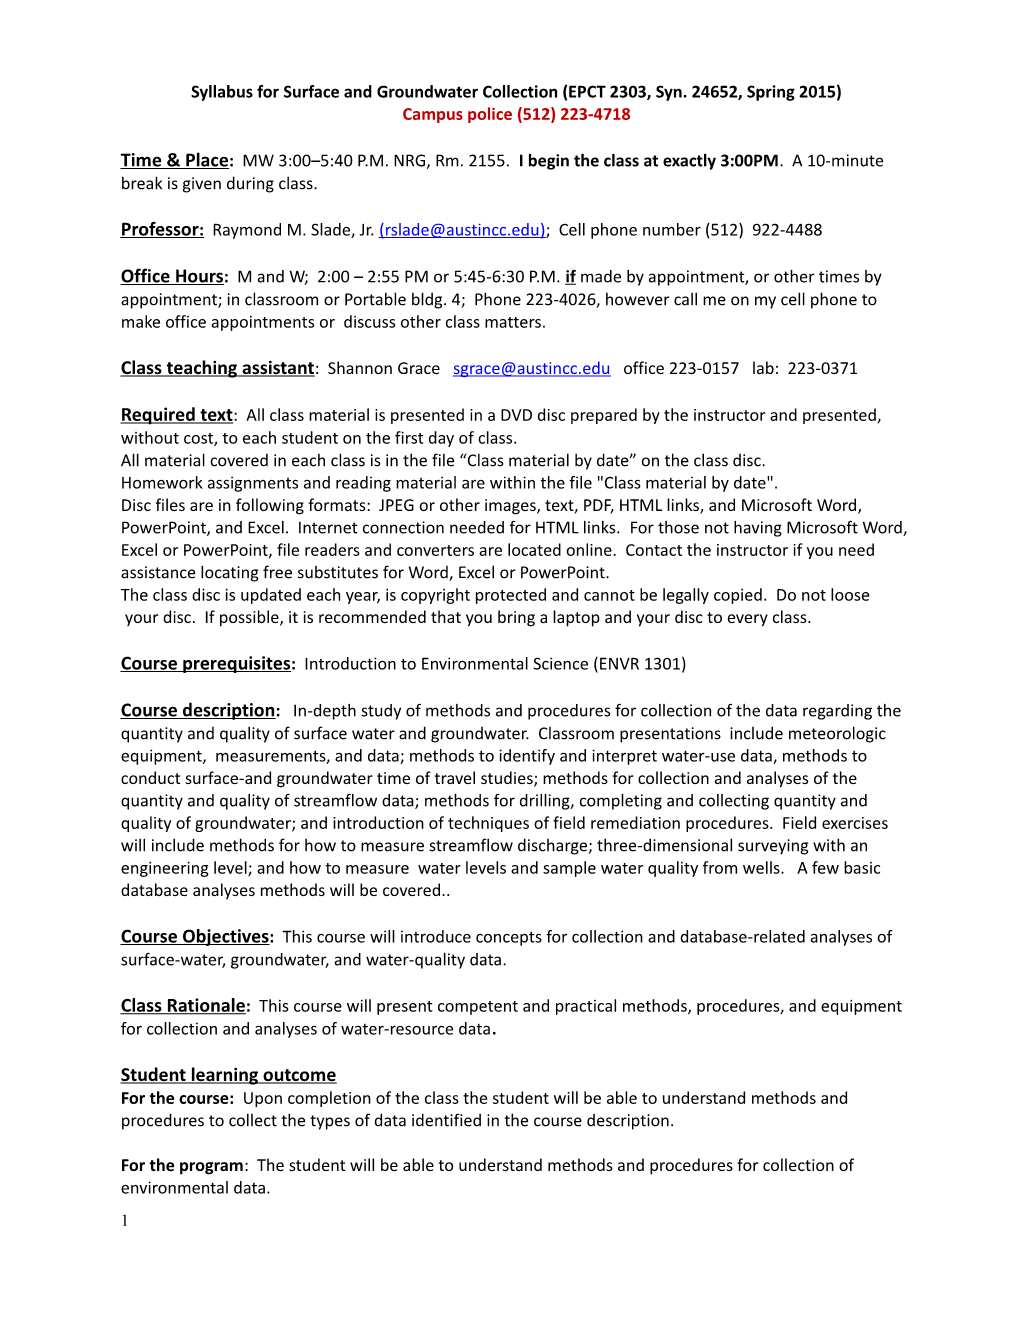 Syllabus for Surface and Groundwater Collection (EPCT 2303, Syn. 24652, Spring 2015)